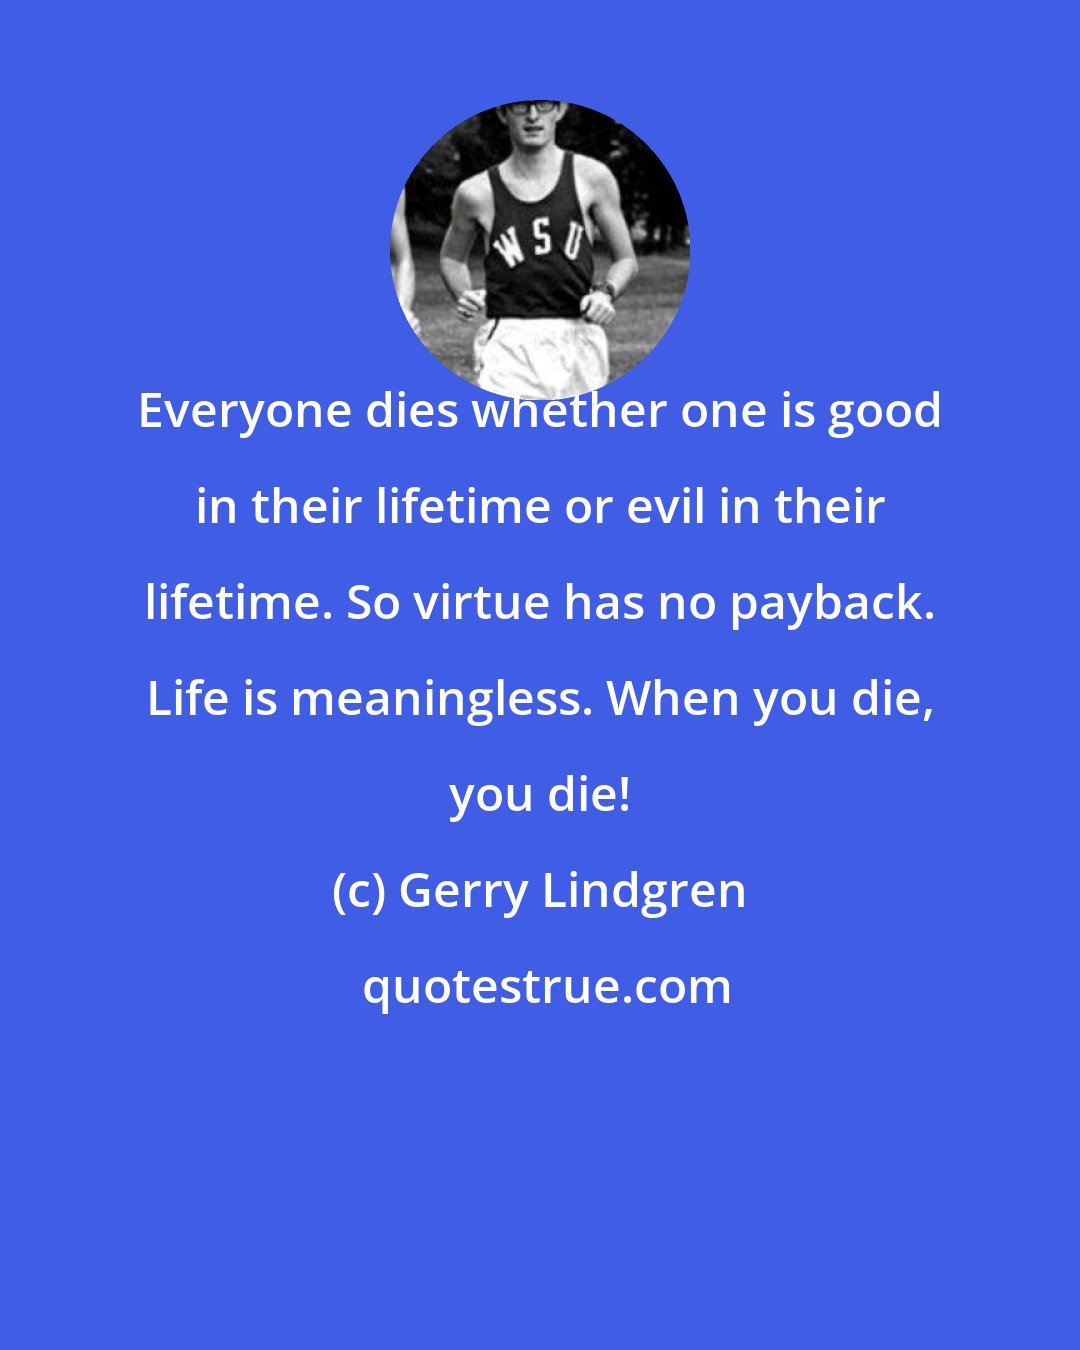 Gerry Lindgren: Everyone dies whether one is good in their lifetime or evil in their lifetime. So virtue has no payback. Life is meaningless. When you die, you die!